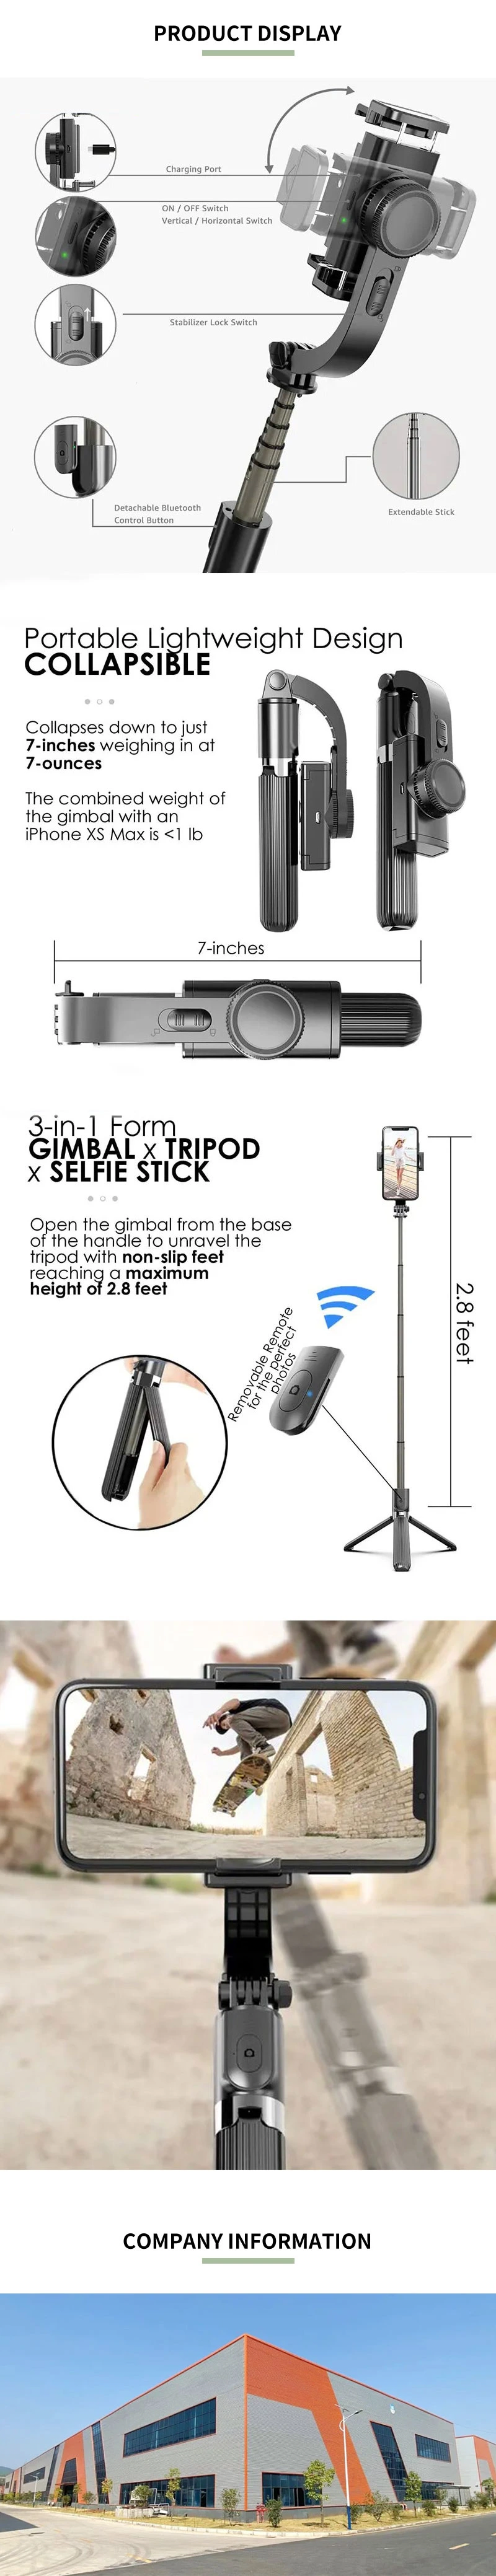 Hot Sale 3 Axis Handheld Gimbal S5b Camera Stabilizer with Tripod Face Tracking Via APP Selfie Stick Gimbal Stabilizer